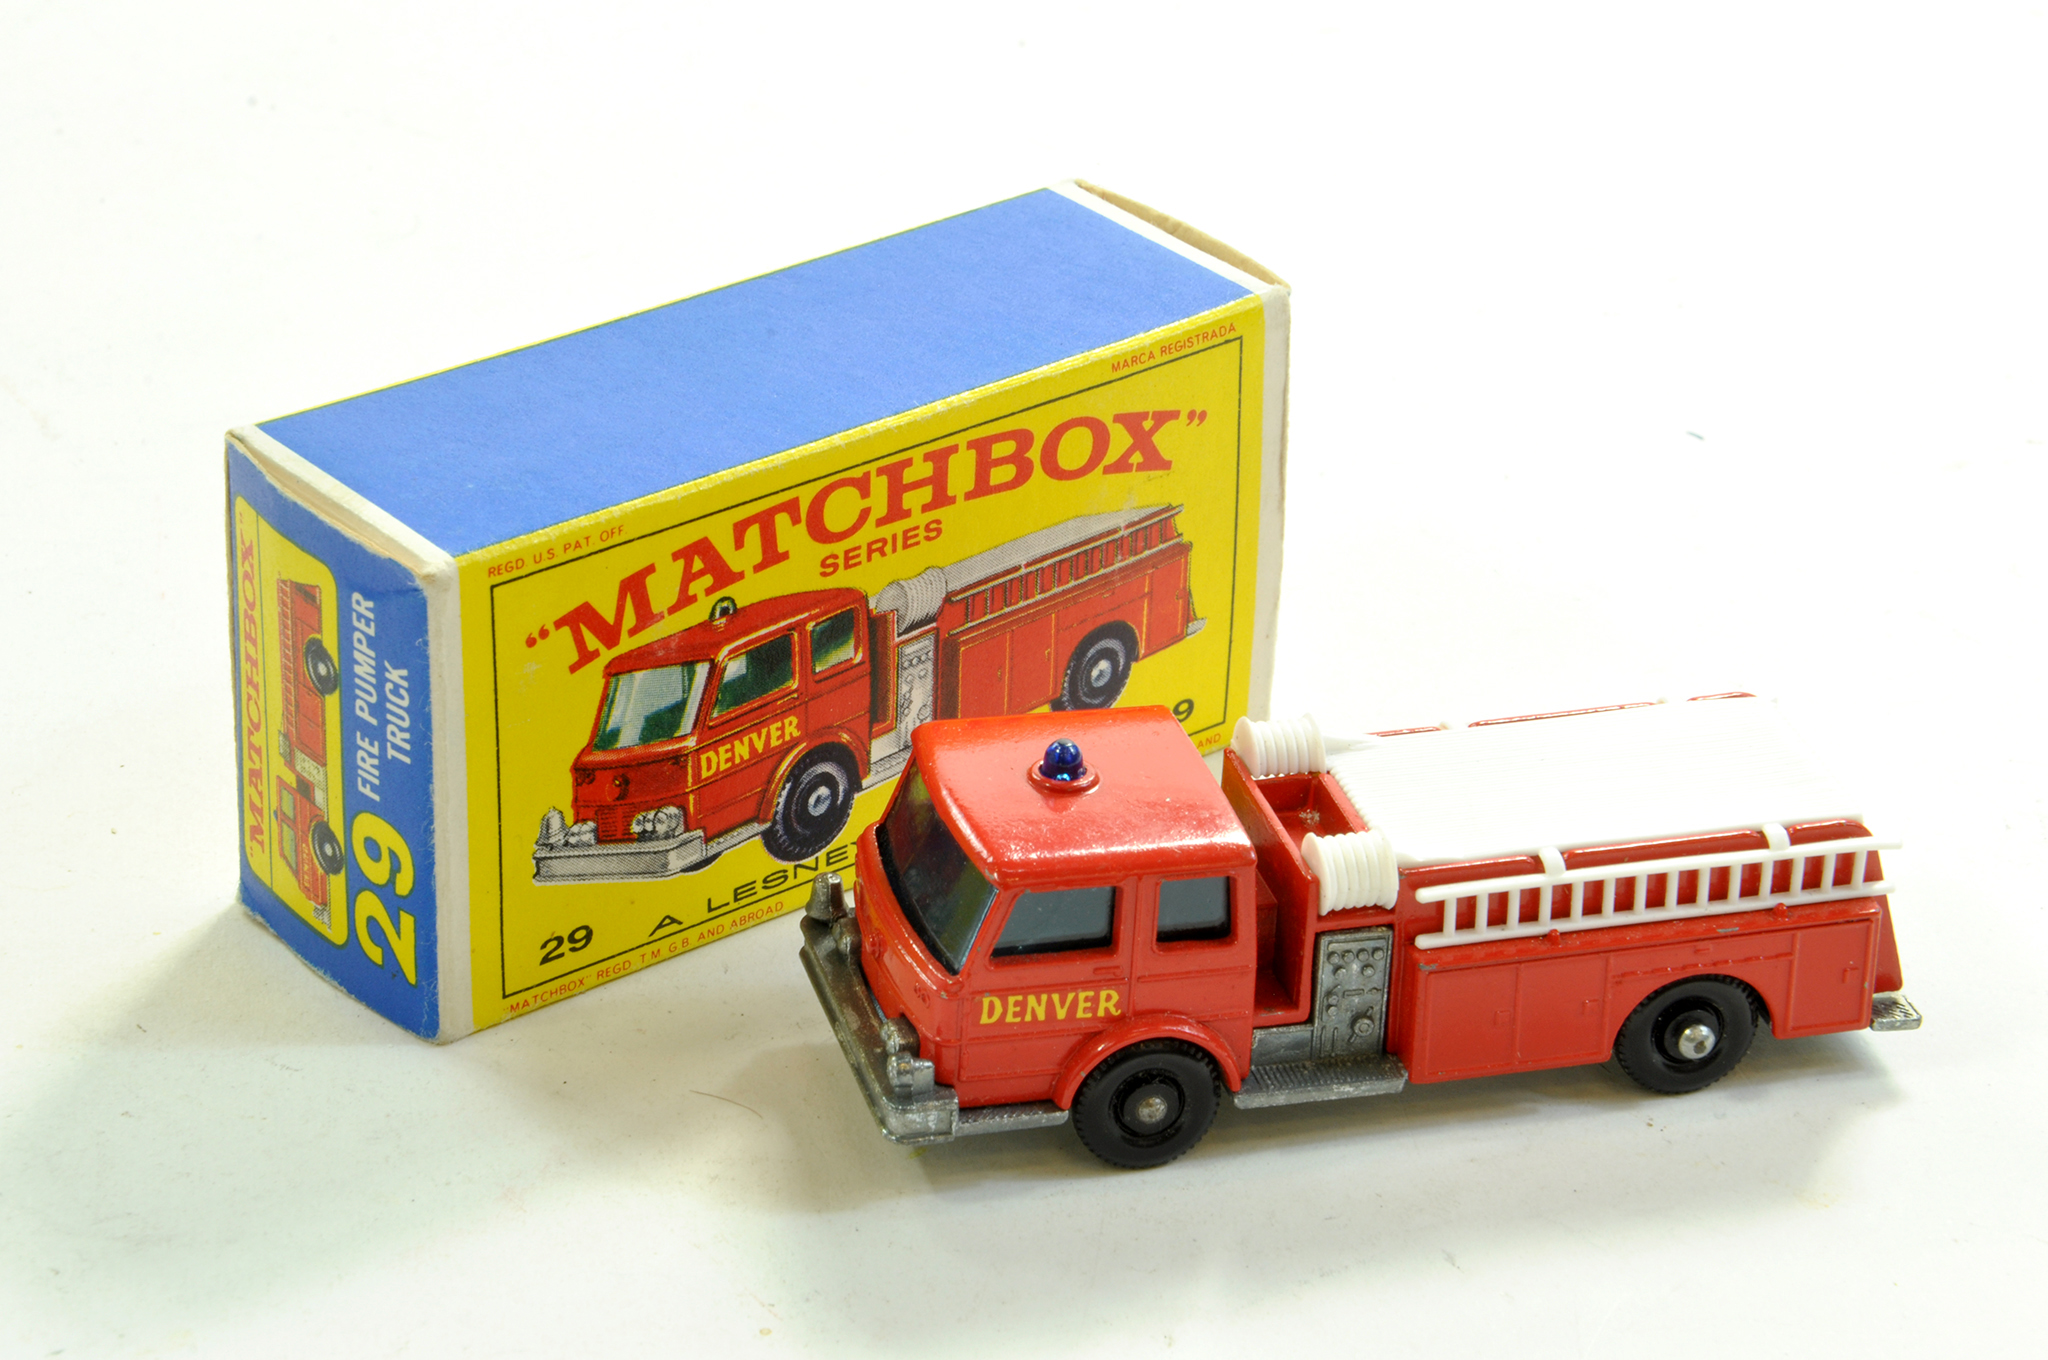 Matchbox Regular Wheels No. 29C Fire Pumper Truck. Very Good to Excellent in Very Good to